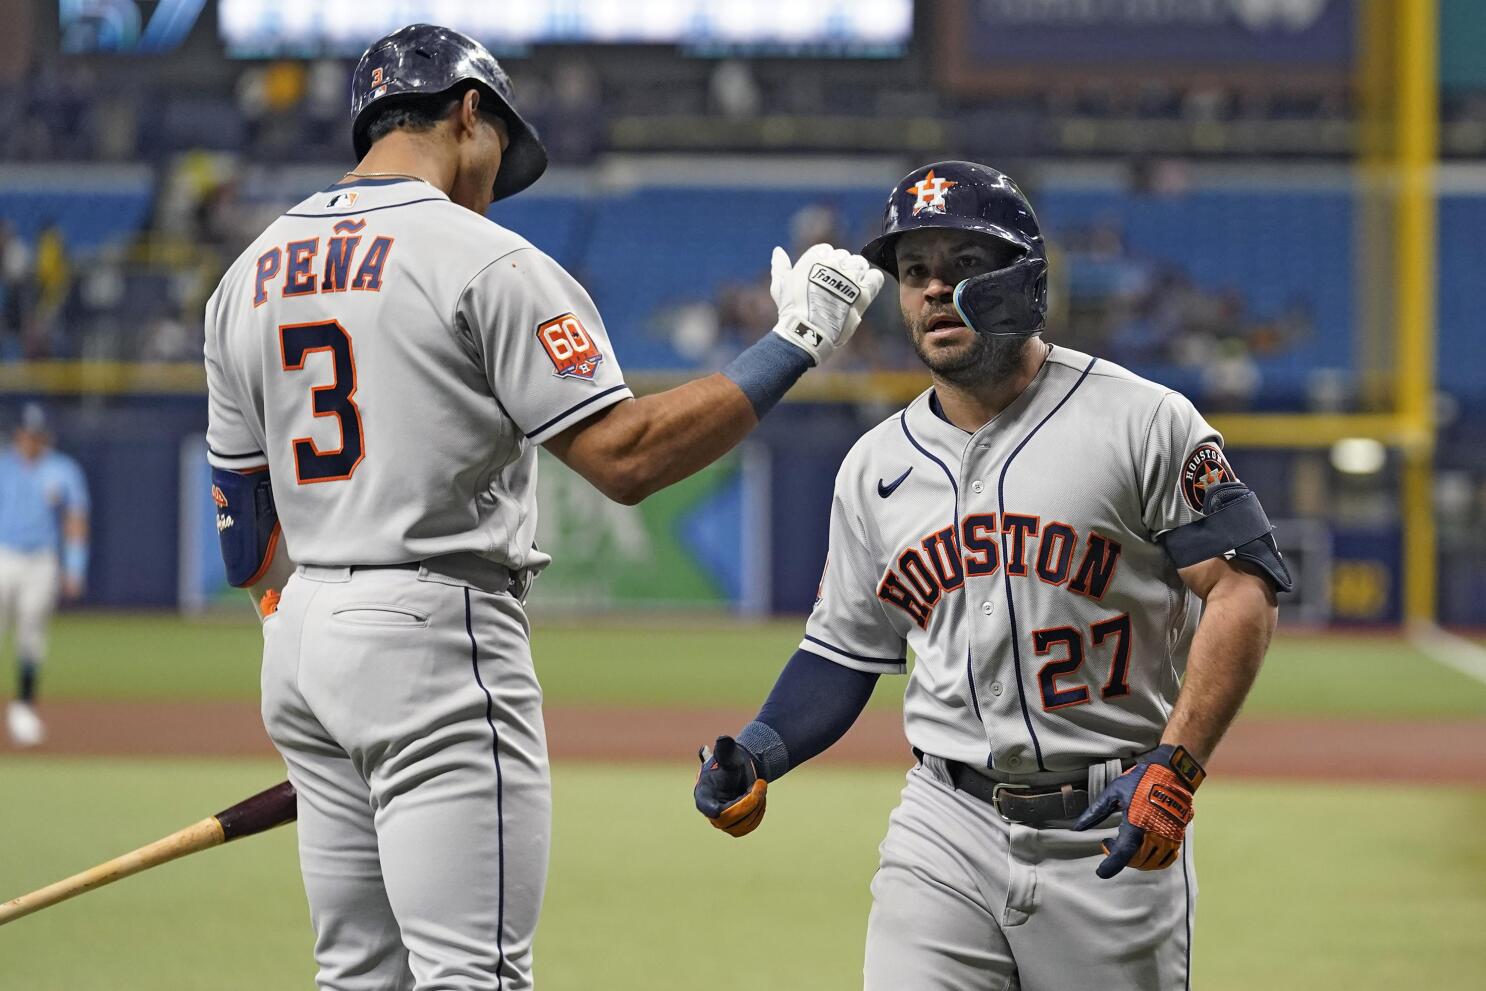 COLUMN: Is Altuve the best Astros player of all time?